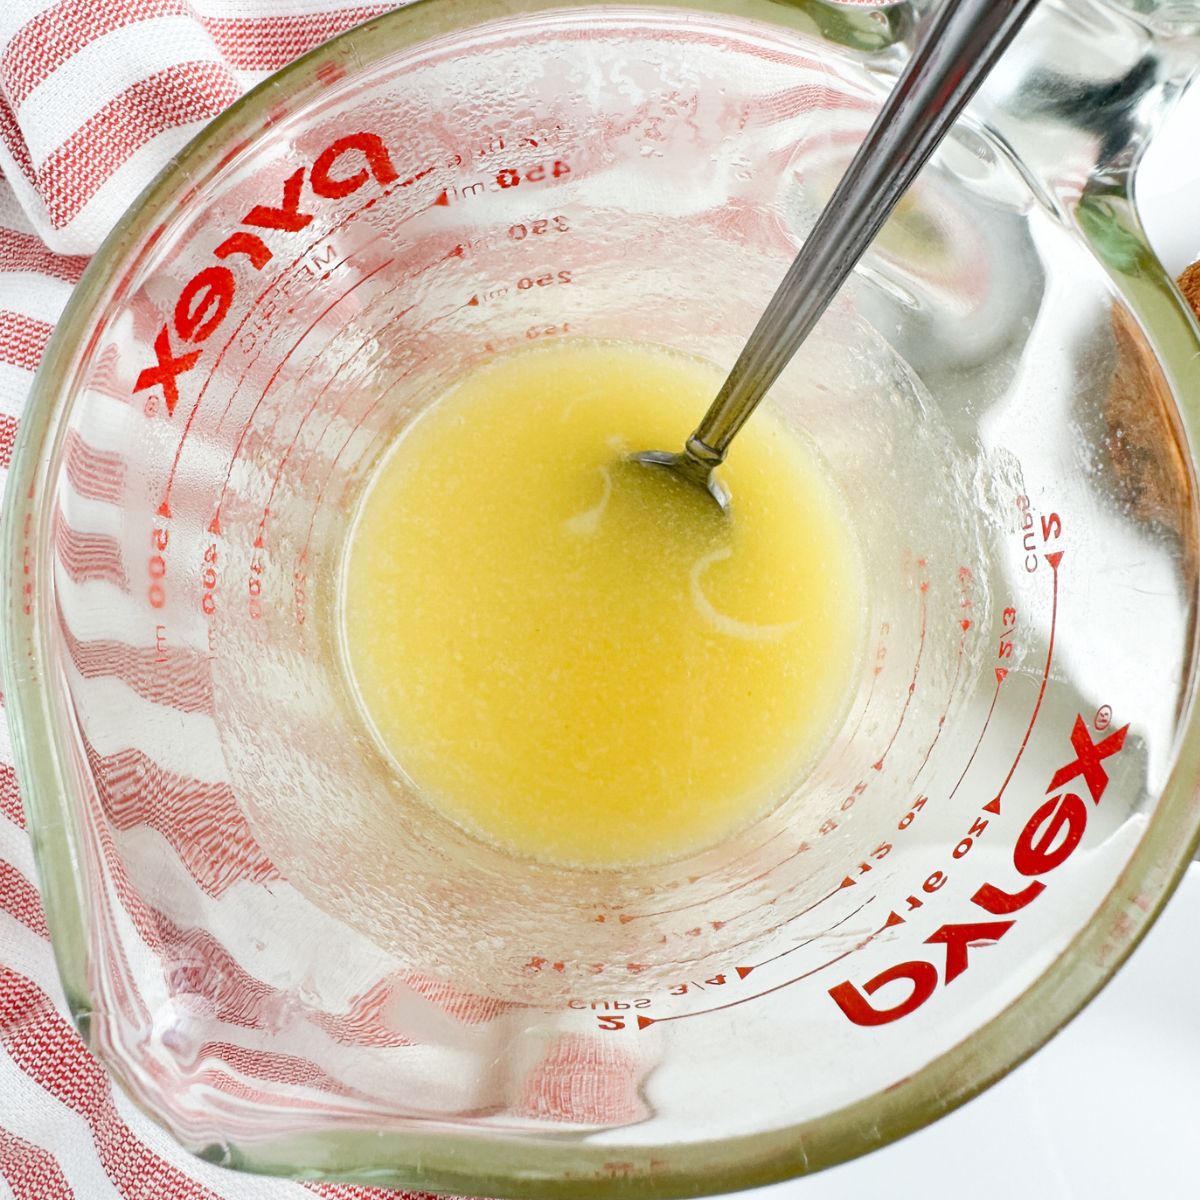 Glass bowl with melted butter and spoon.